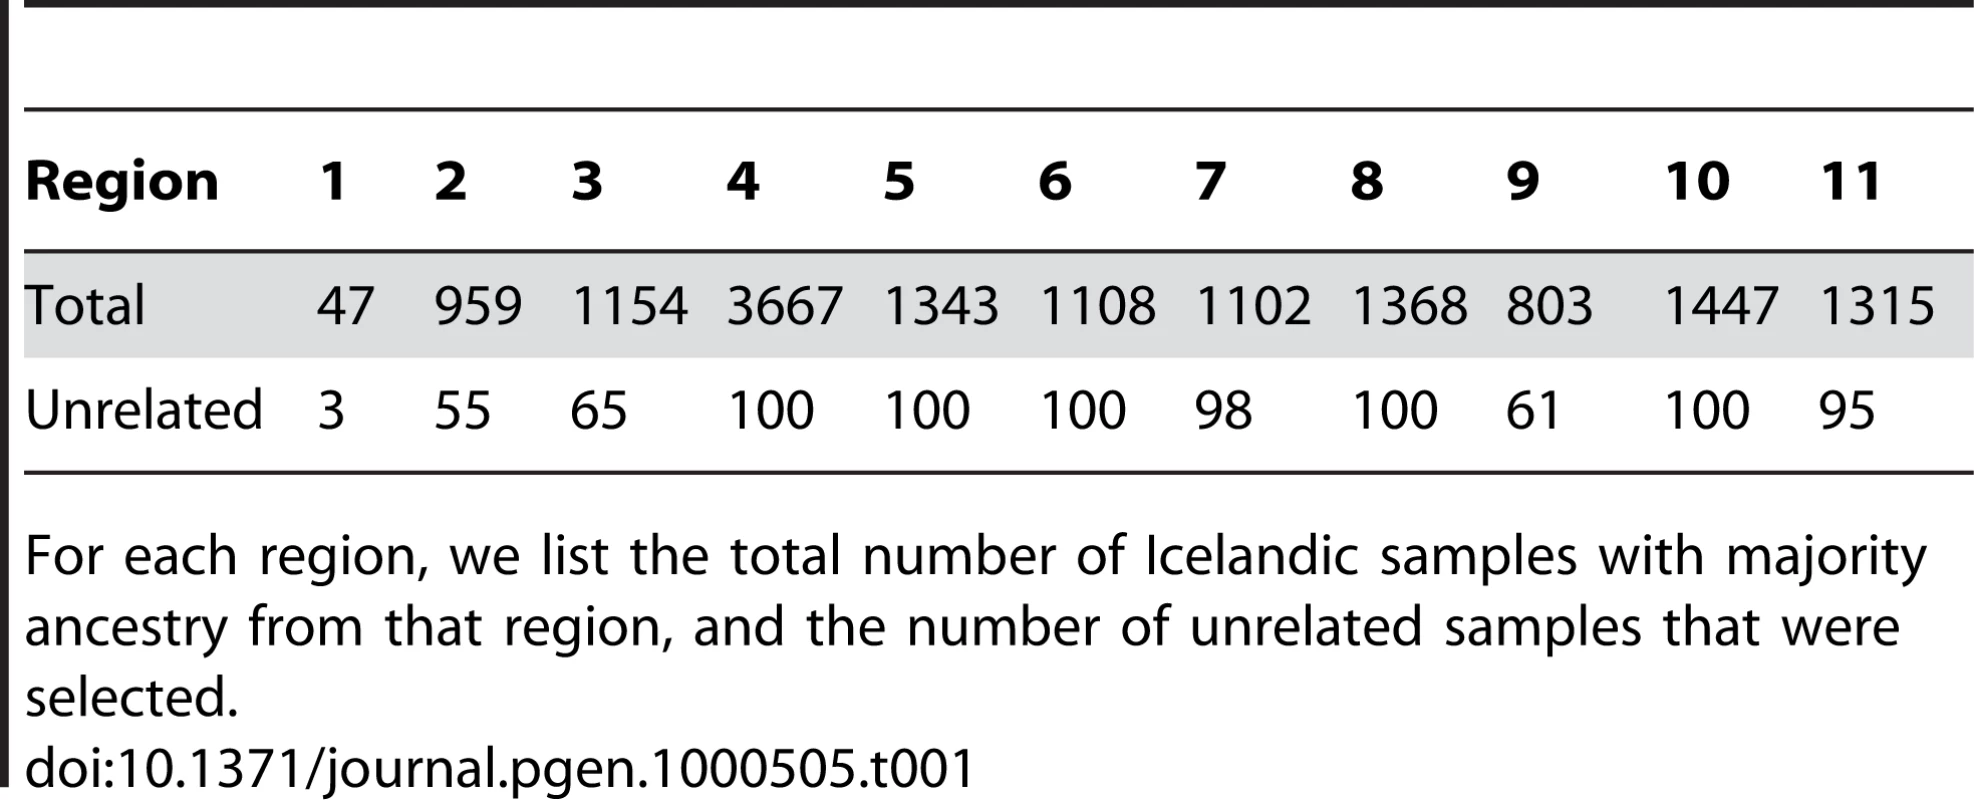 Data for Icelandic samples with majority ancestry from each of the 11 regions.